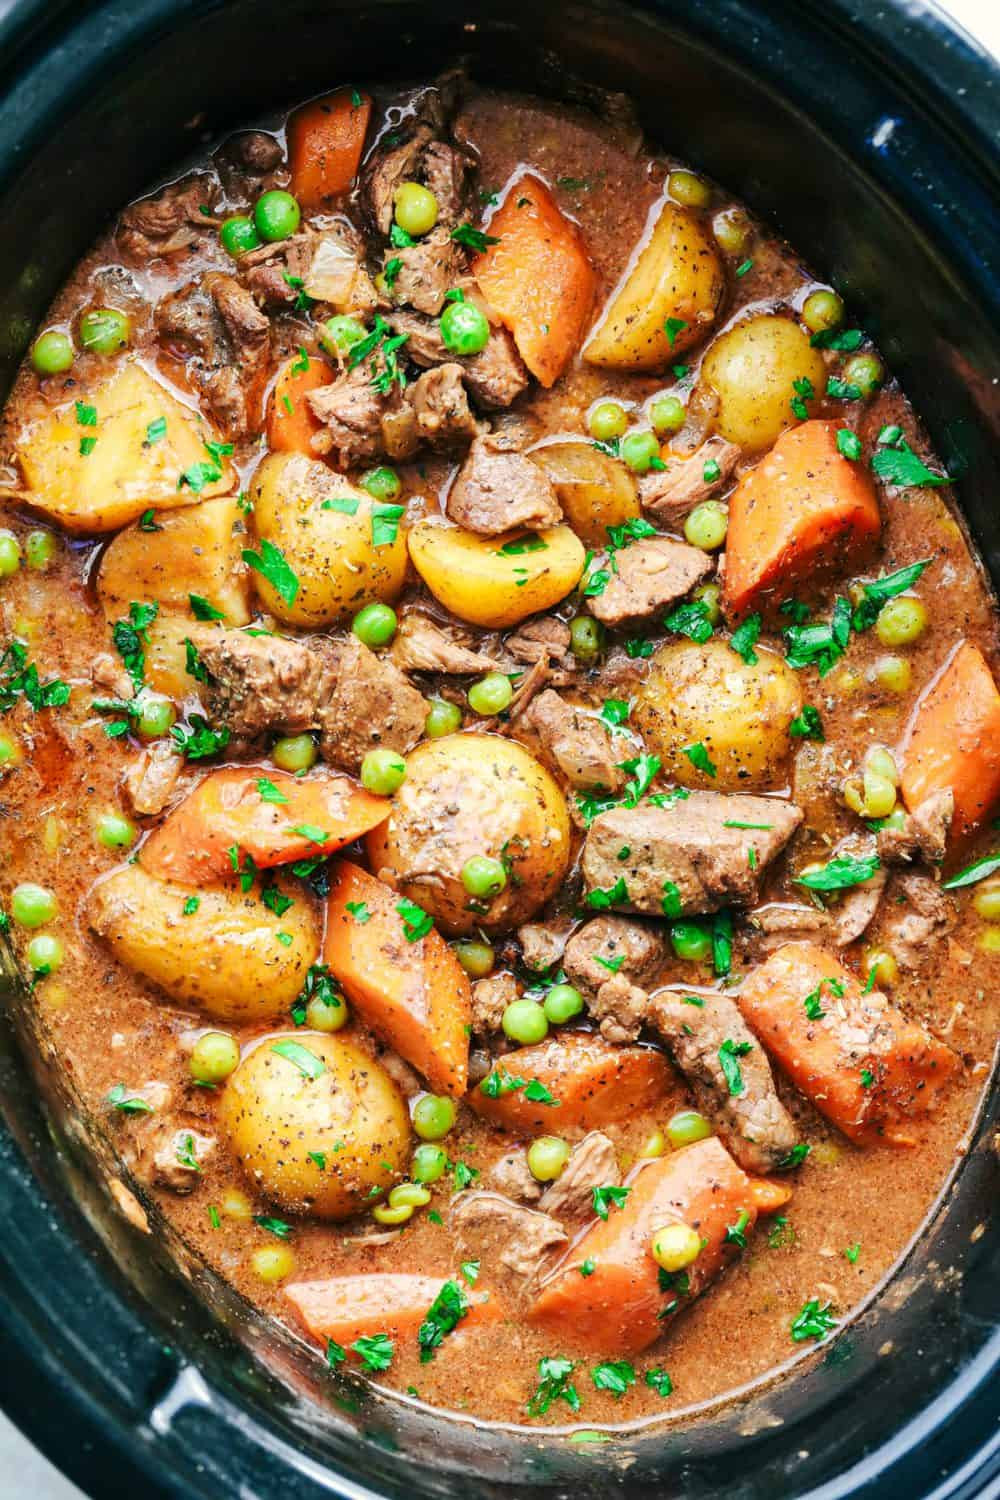 How To Make Beef Stew
 Best Ever Slow Cooker Beef Stew